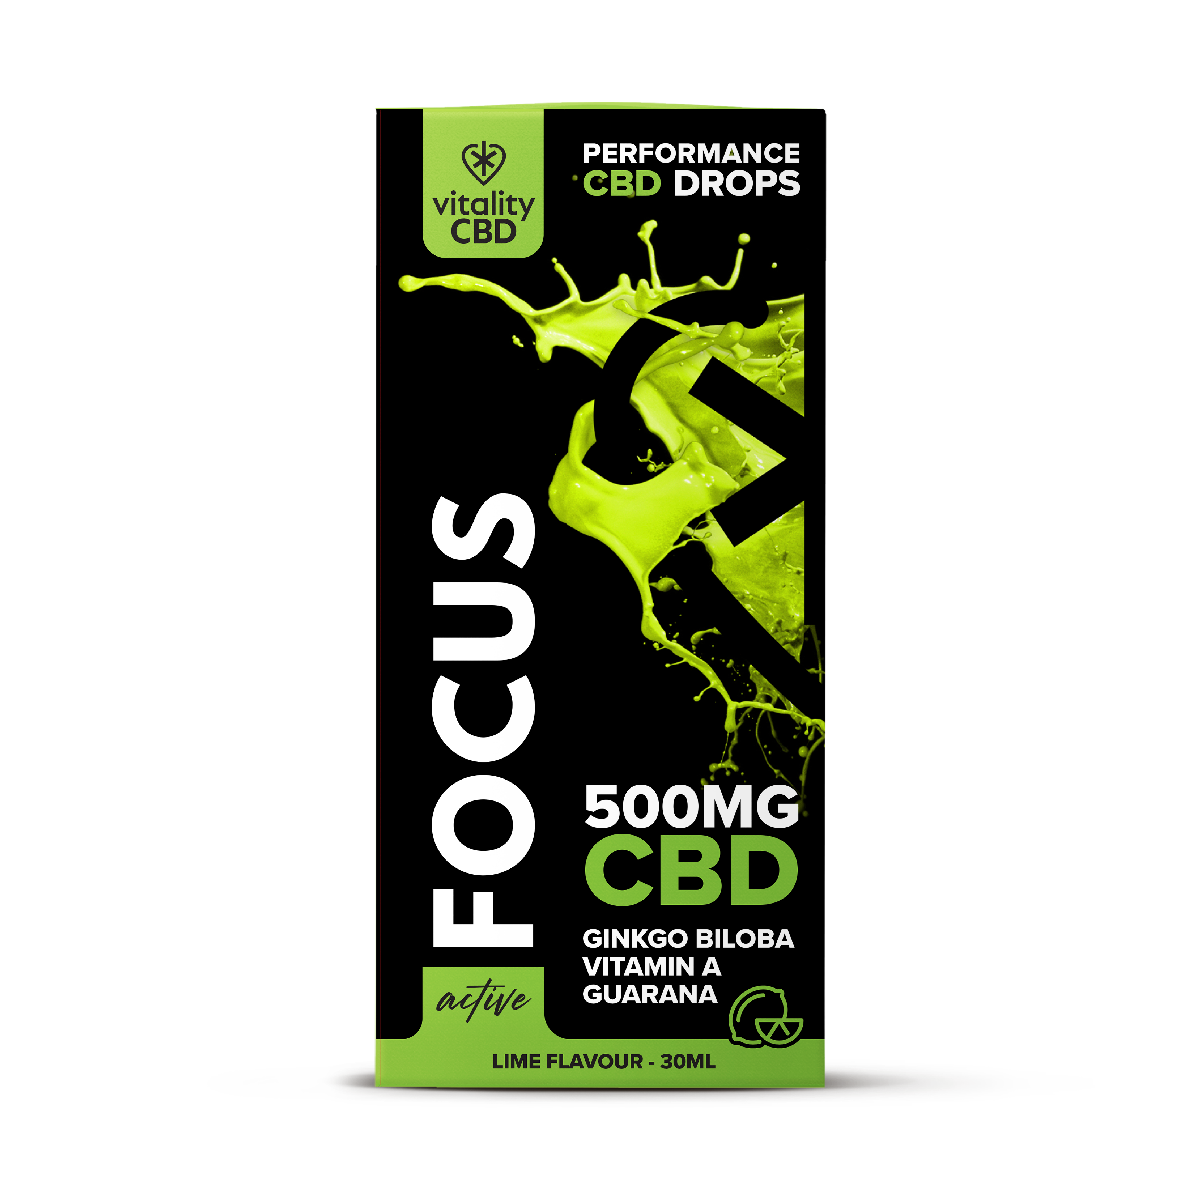 CBD Oil Drops For Active Sports in 500mg